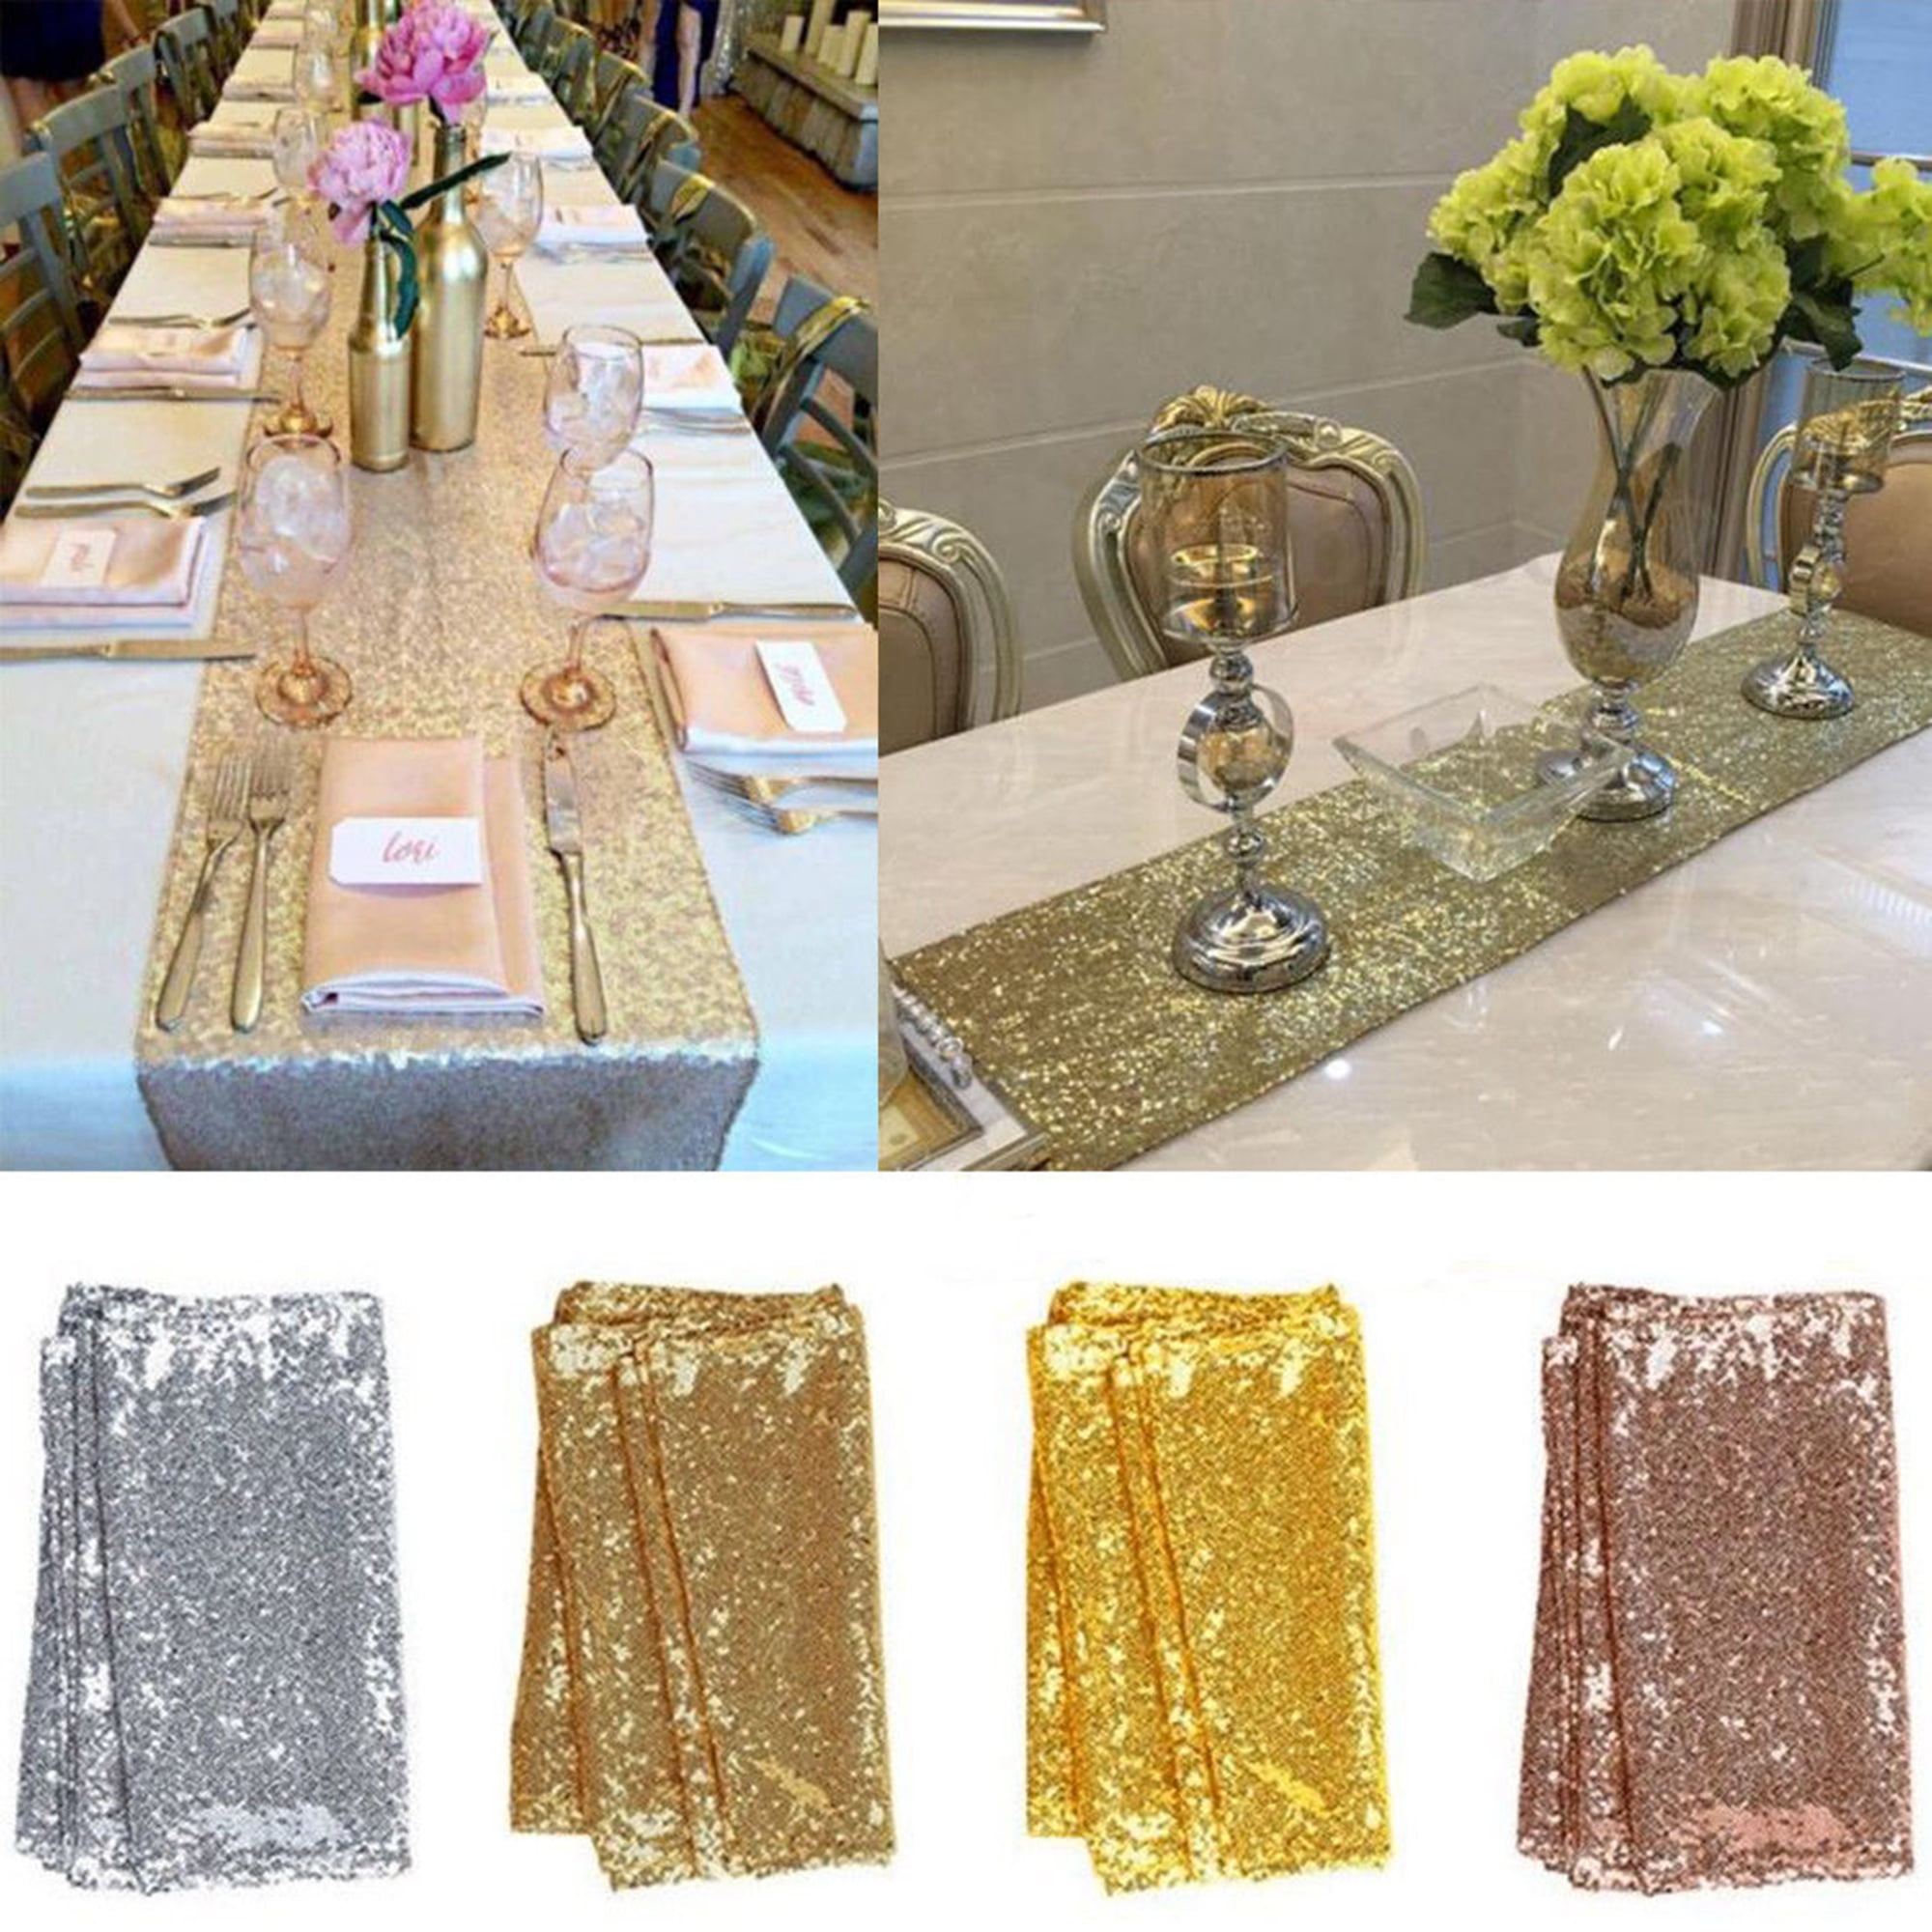 Glitter Sequin Table Runner Shinny Tablecloth Linens Party Wedding Decor Sparkly 